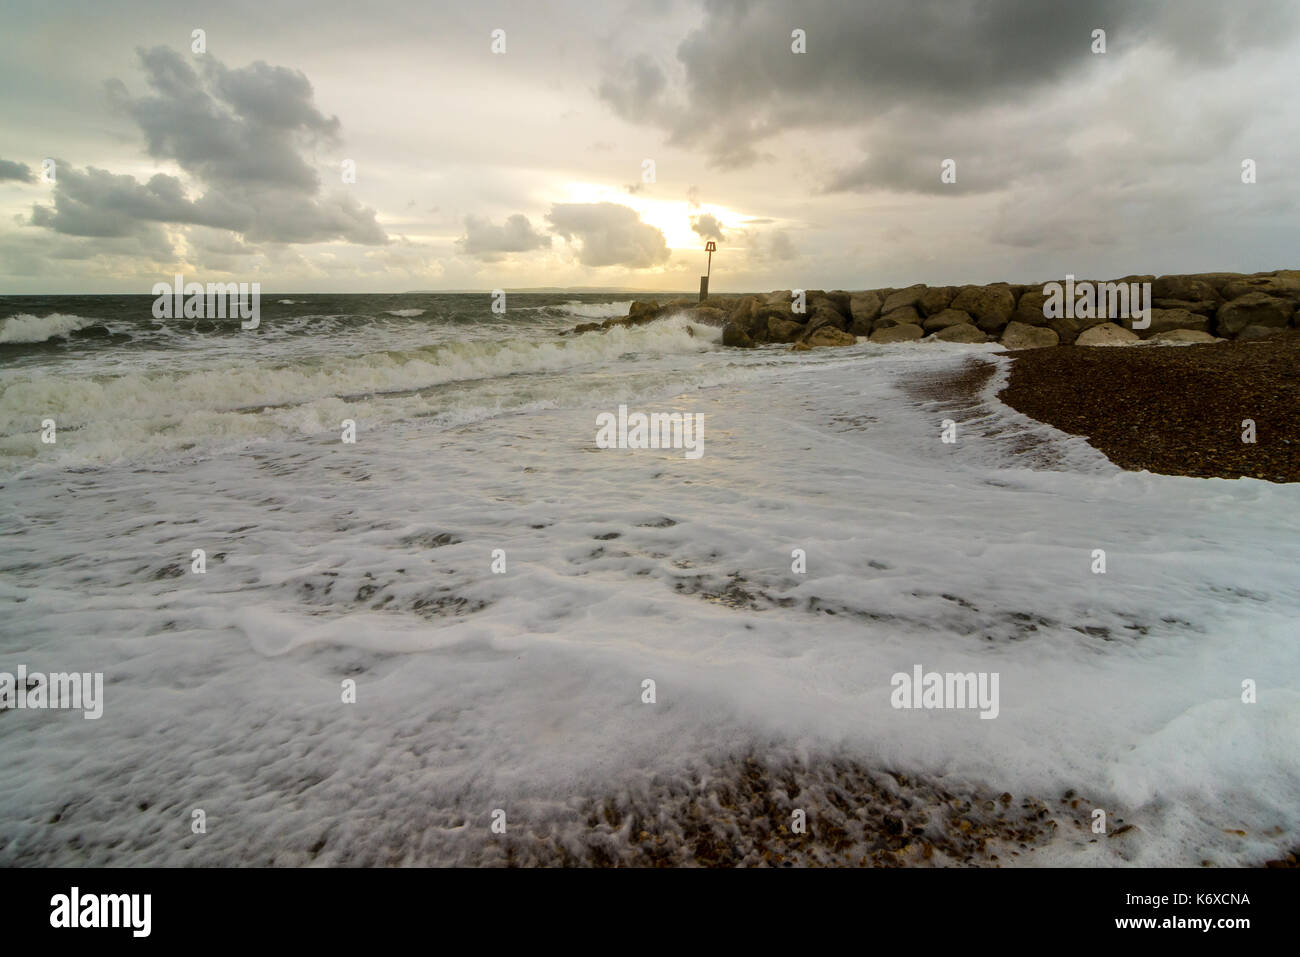 Windy weather at Hengistbury Head, Christchurch, Dorset, UK as a storm approaches. Stock Photo